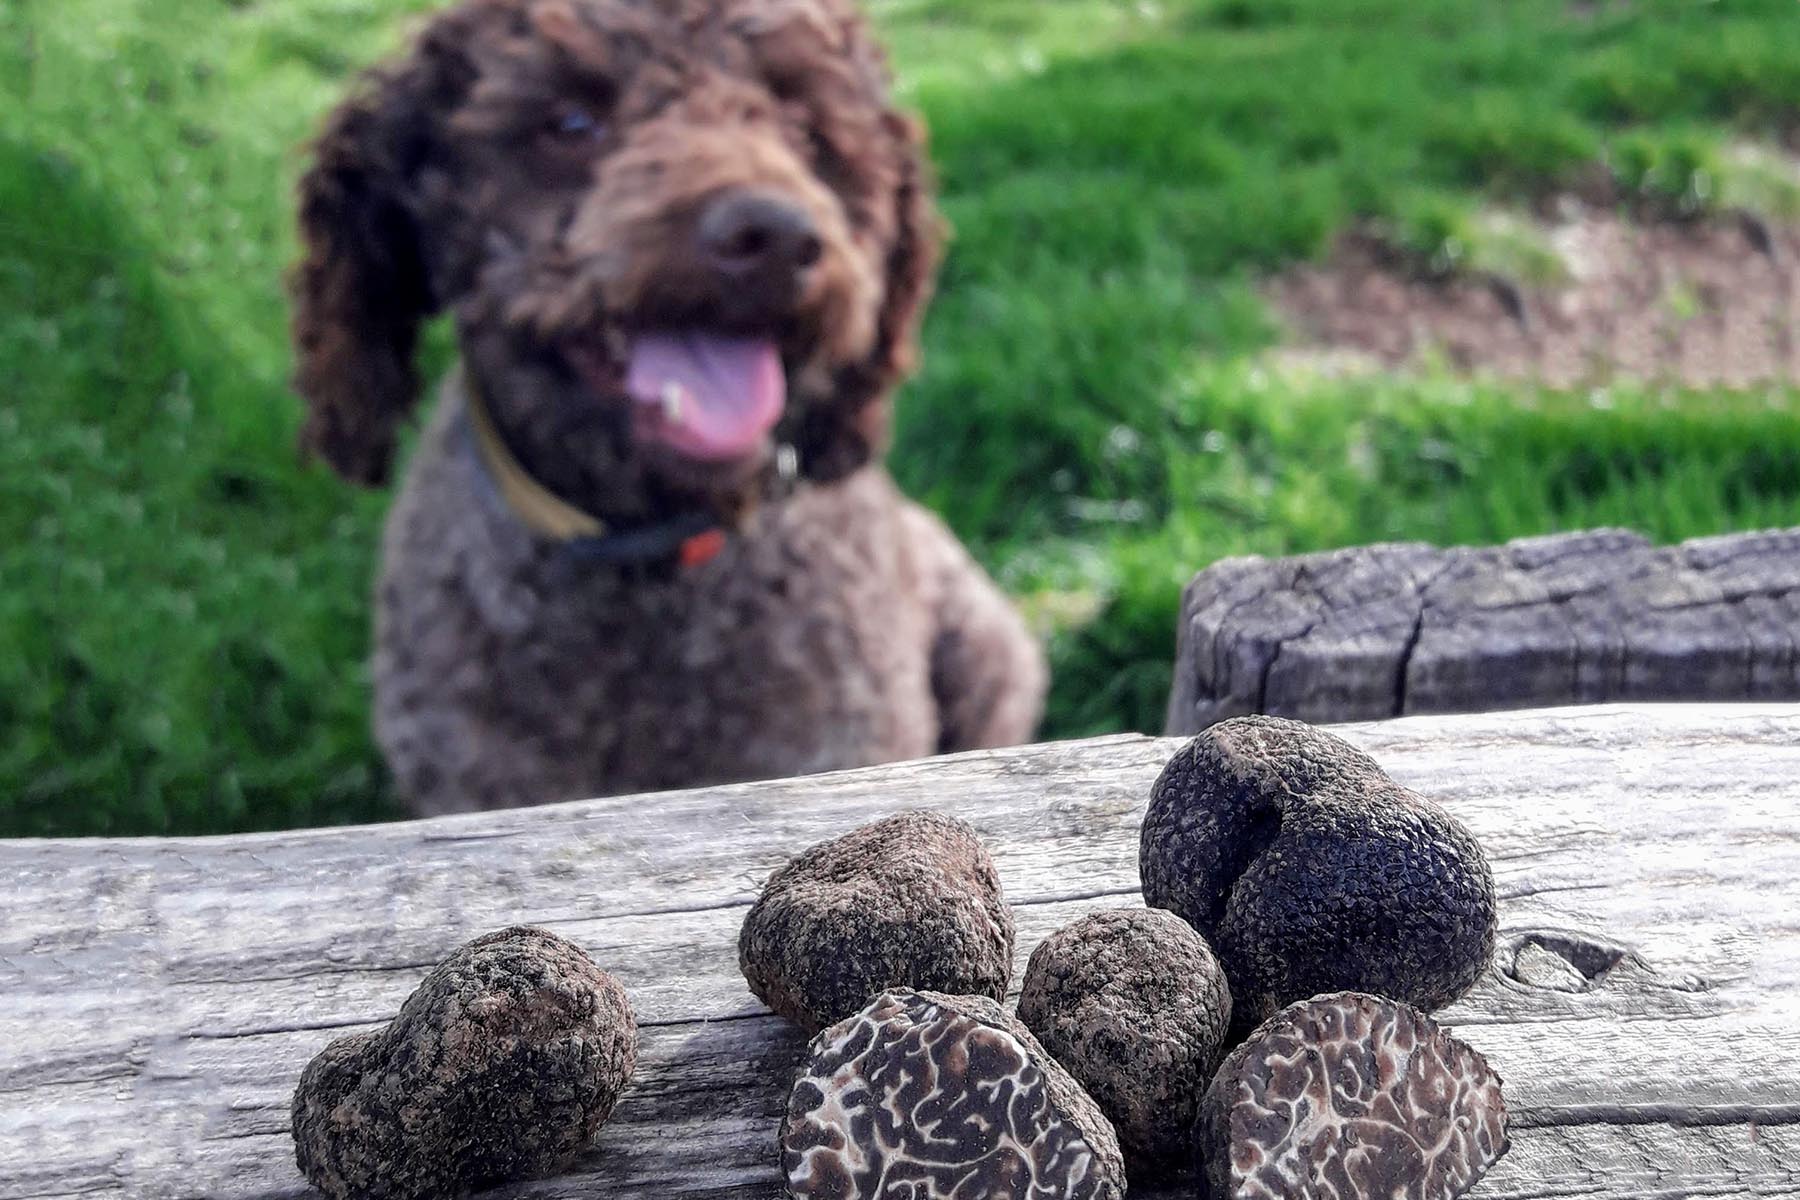 Truffle Dogs: Truffle dogs are specially trained to detect the scent of truffles underground. Their keen sense of smell and natural hunting instincts make them invaluable companions for truffle hunters. ]]>